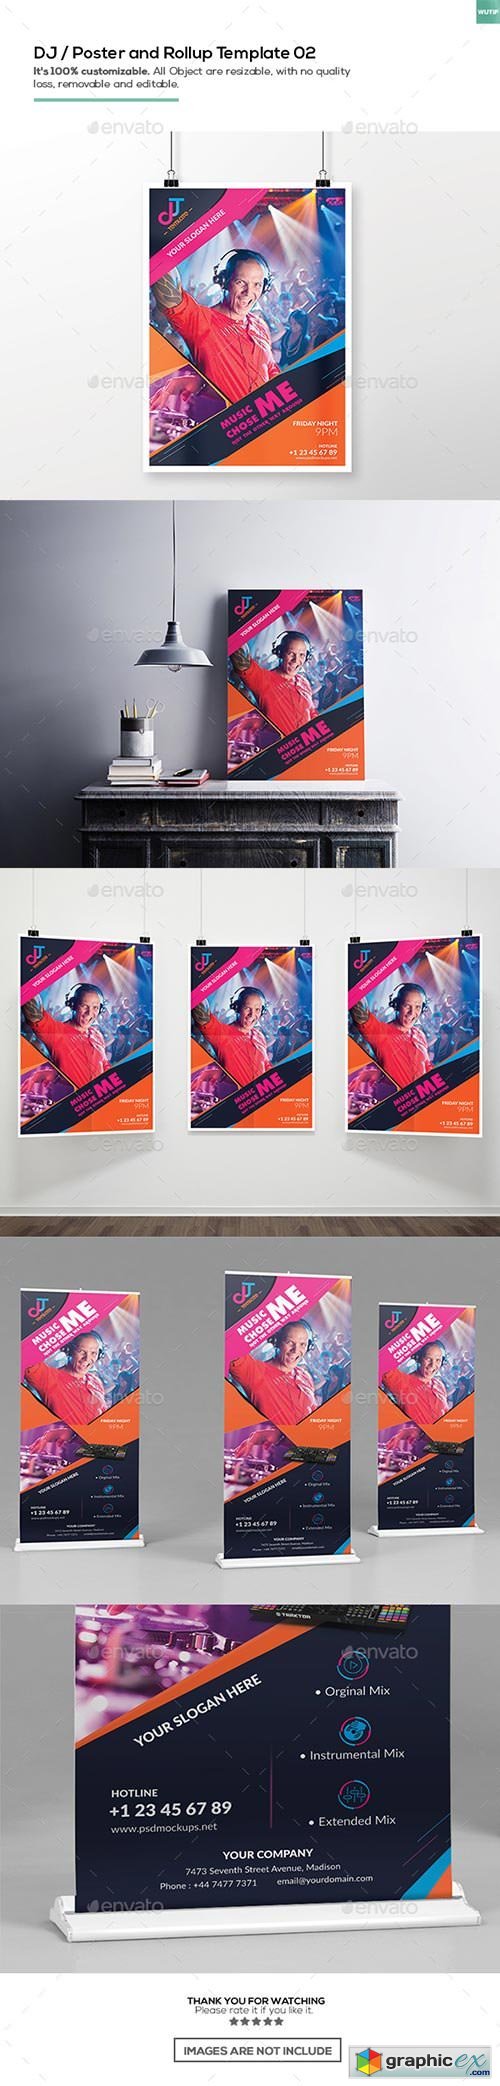 DJ/ A3 Poster and Rollup Template 02